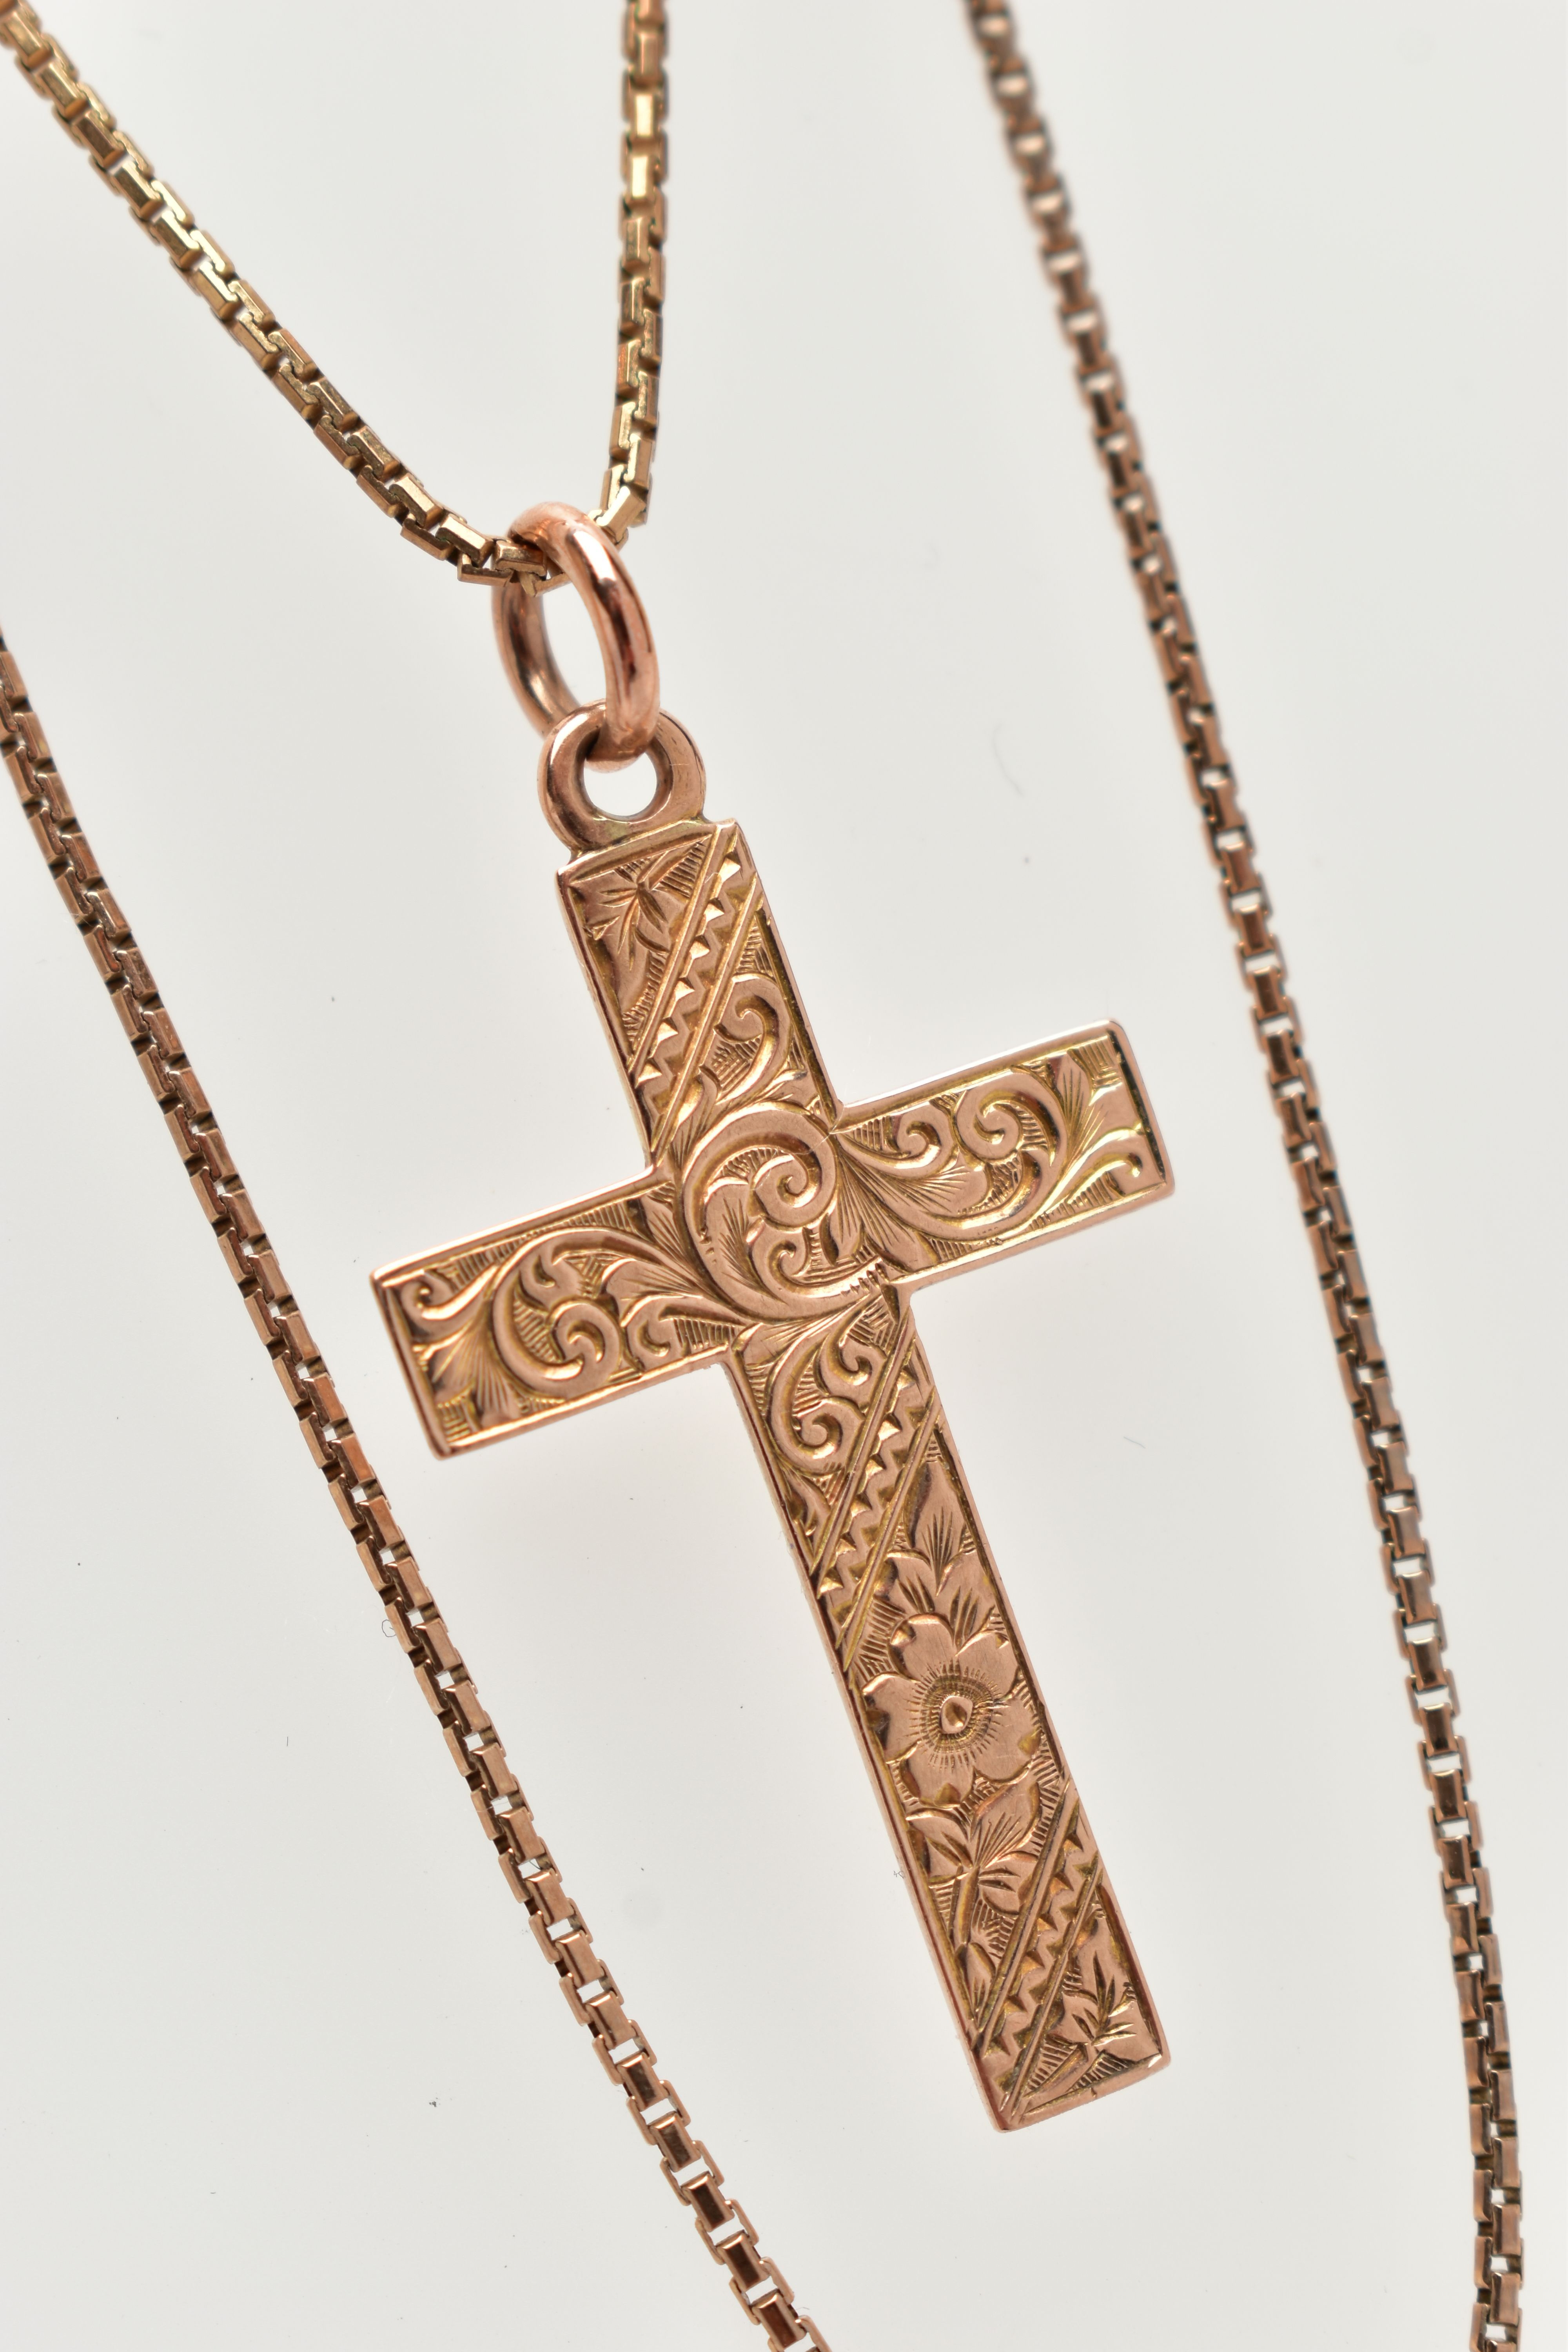 A 9CT GOLD PENDANT AND CHAIN, a rose gold cross pendant with floral and foliage engraved detail, - Image 2 of 3